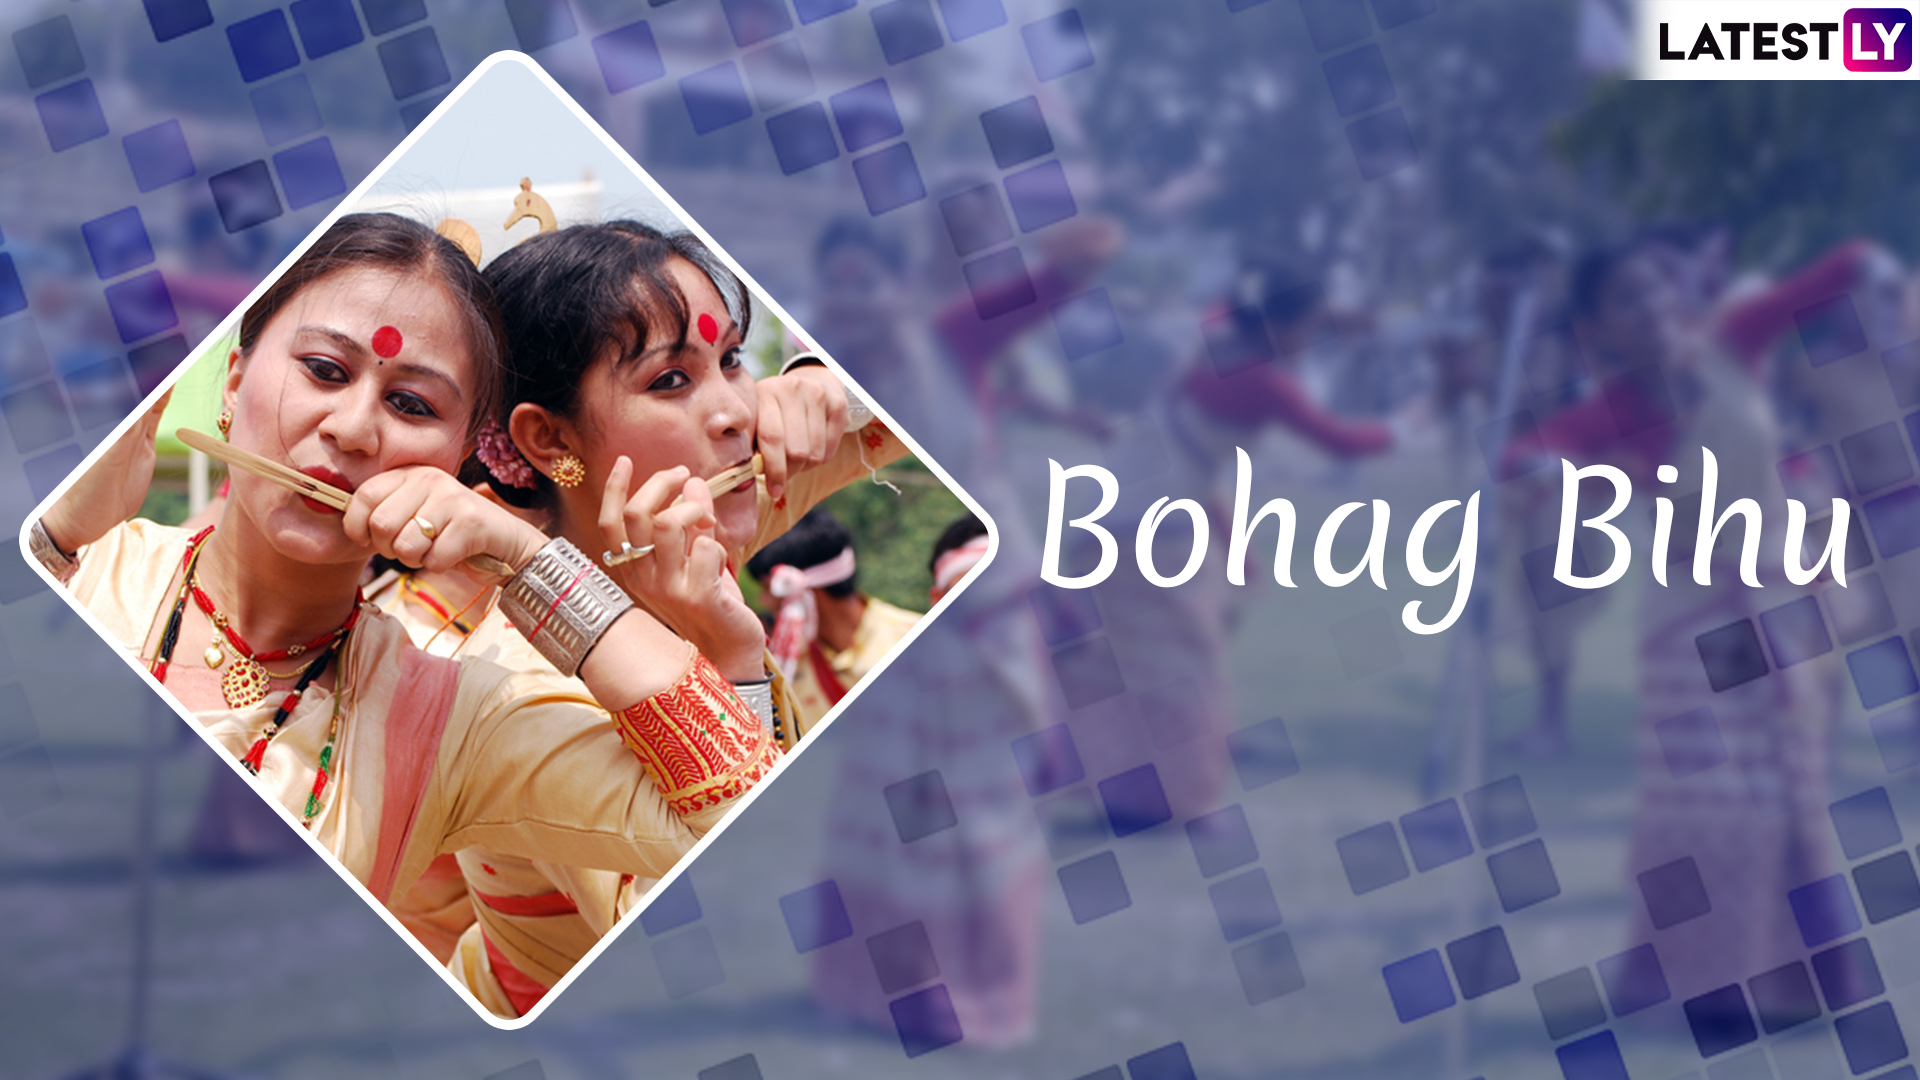 Happy Bohag Bihu 2020 Images & HD Wallpapers for Free Download Online